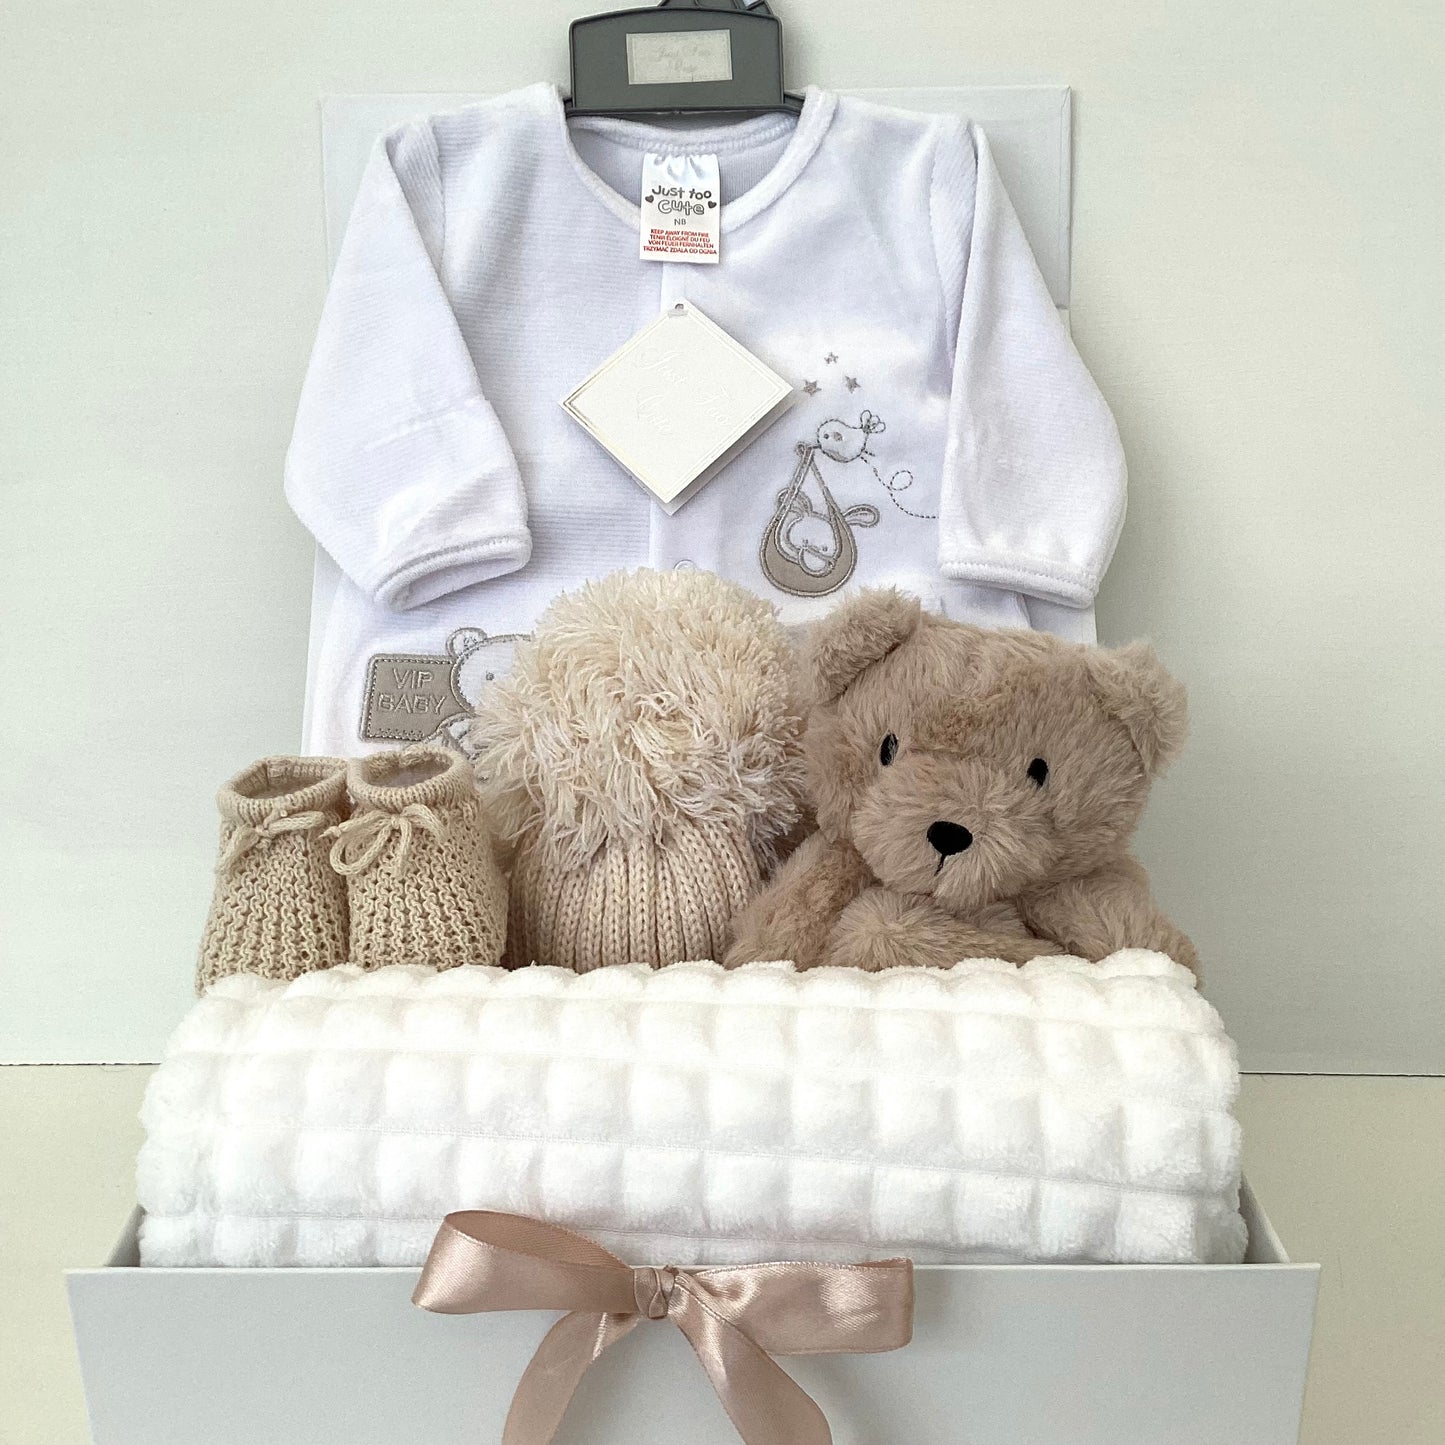 SULLY- Brown bear comforter with luxury onsie and white bobble blanket gift box